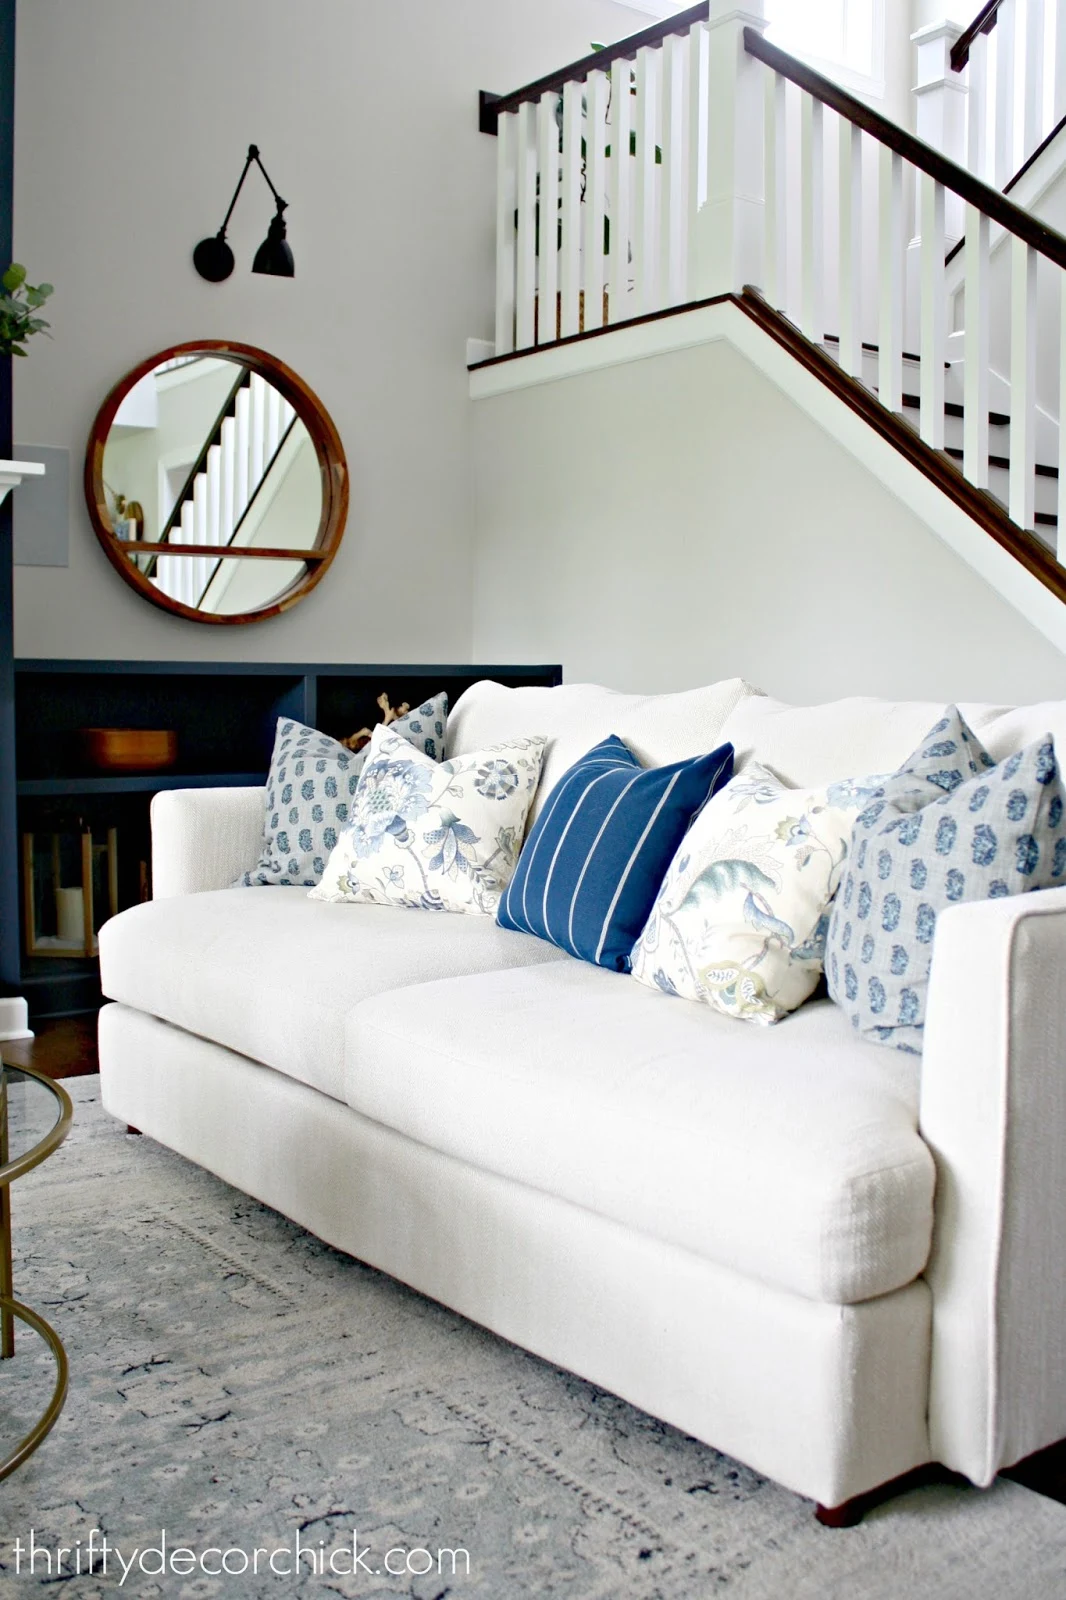 How to Keep Couch Cushions From Sliding, Thrifty Decor Chick